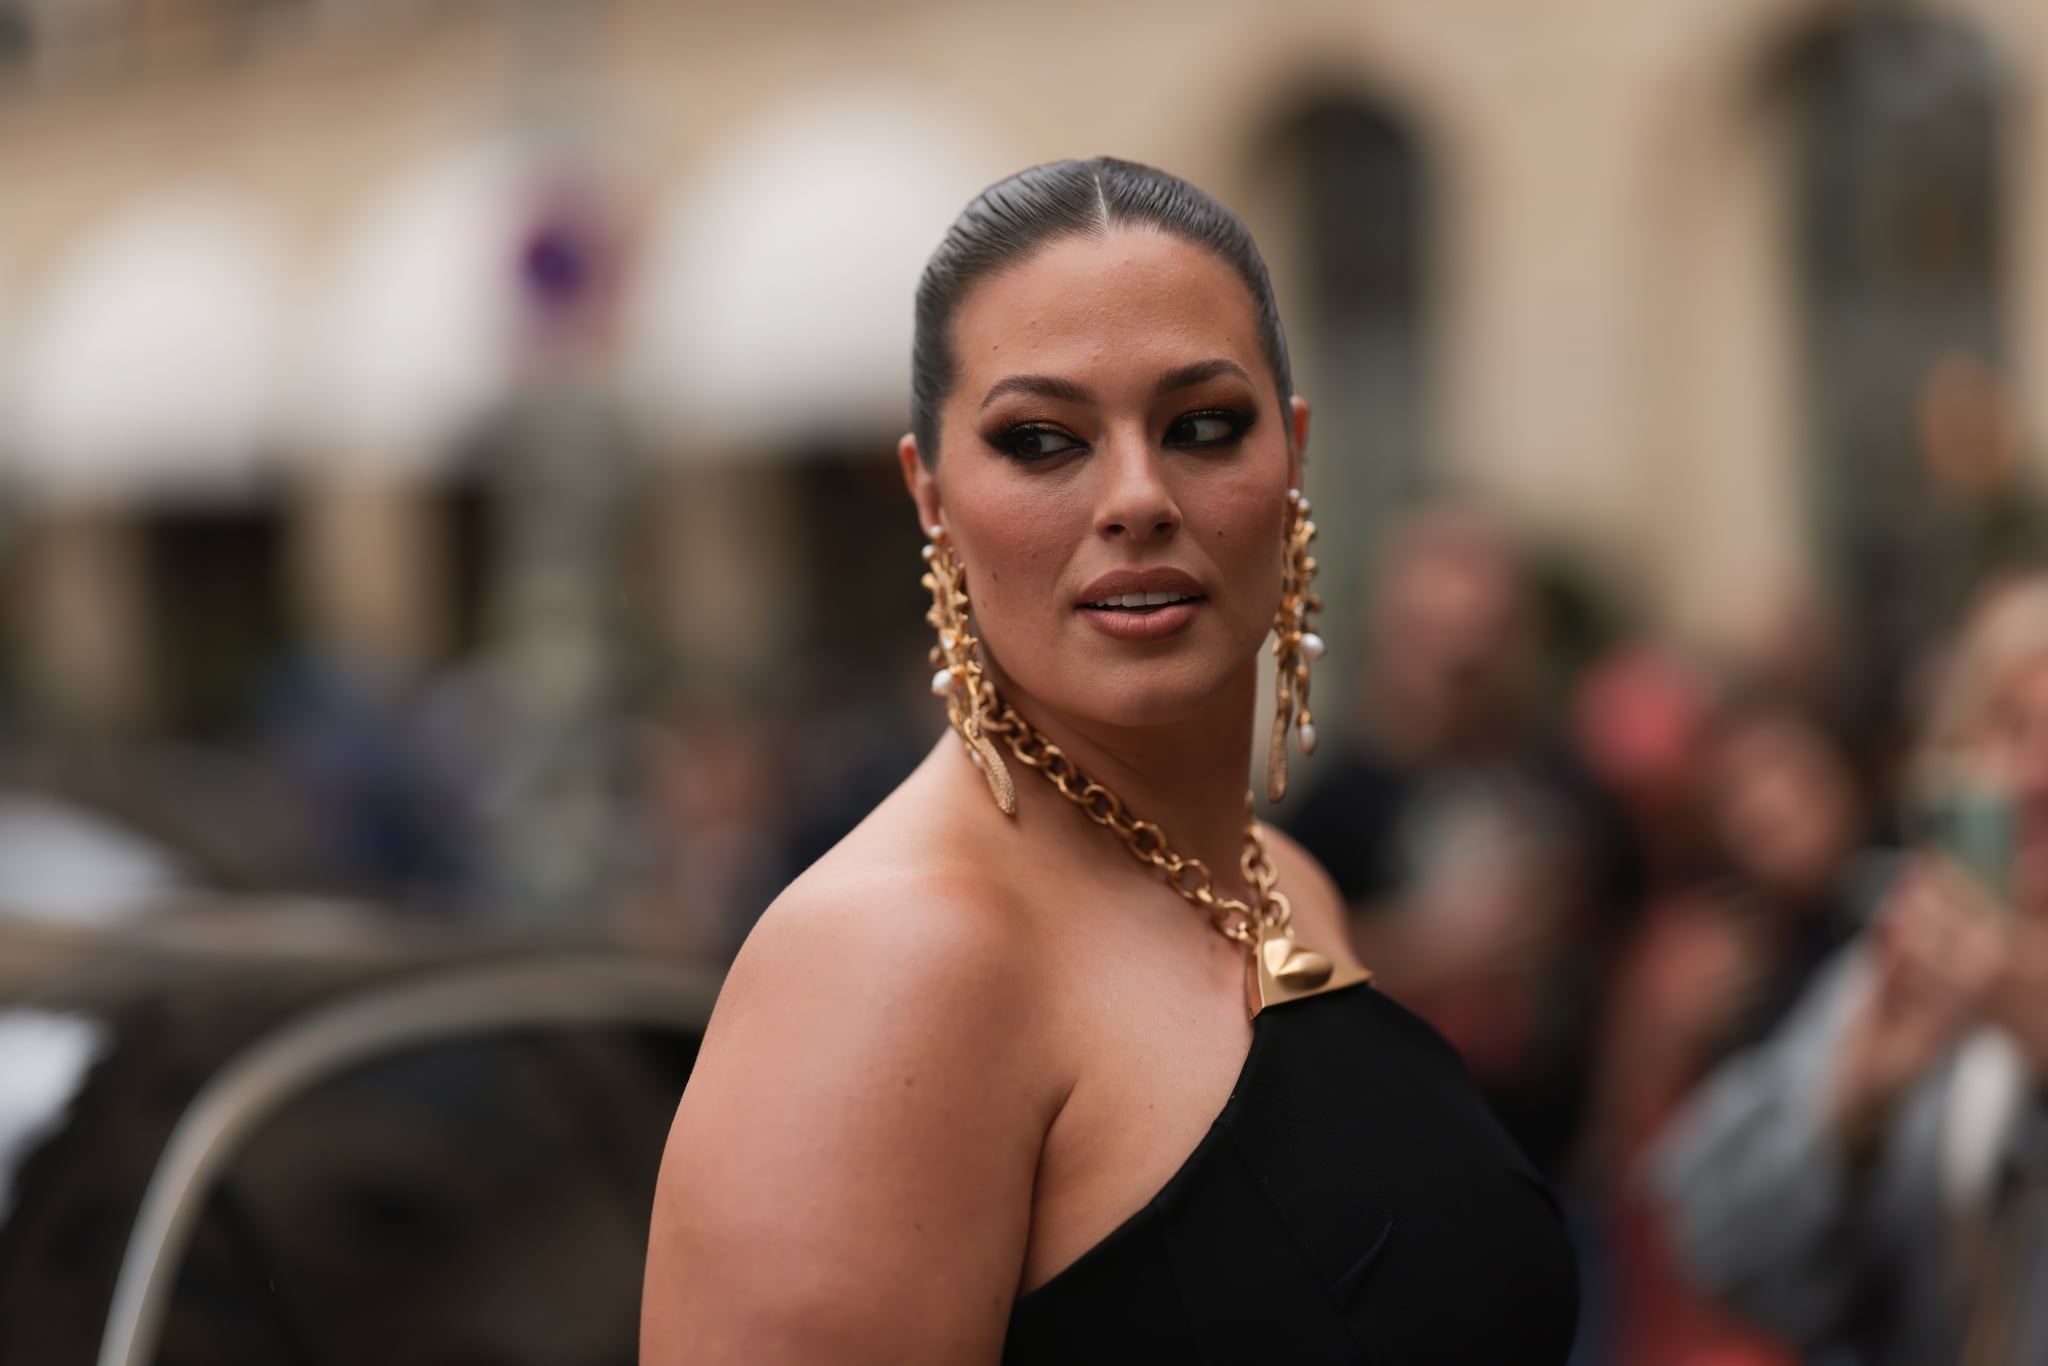 PARIS, FRANCE - SEPTEMBER 29: Ashley Graham seen wearing a total Schiaparelli look, outside Schiaparelli during Paris Fashion Week on September 29, 2022 in Paris, France. (Photo by Jeremy Moeller/Getty Images)